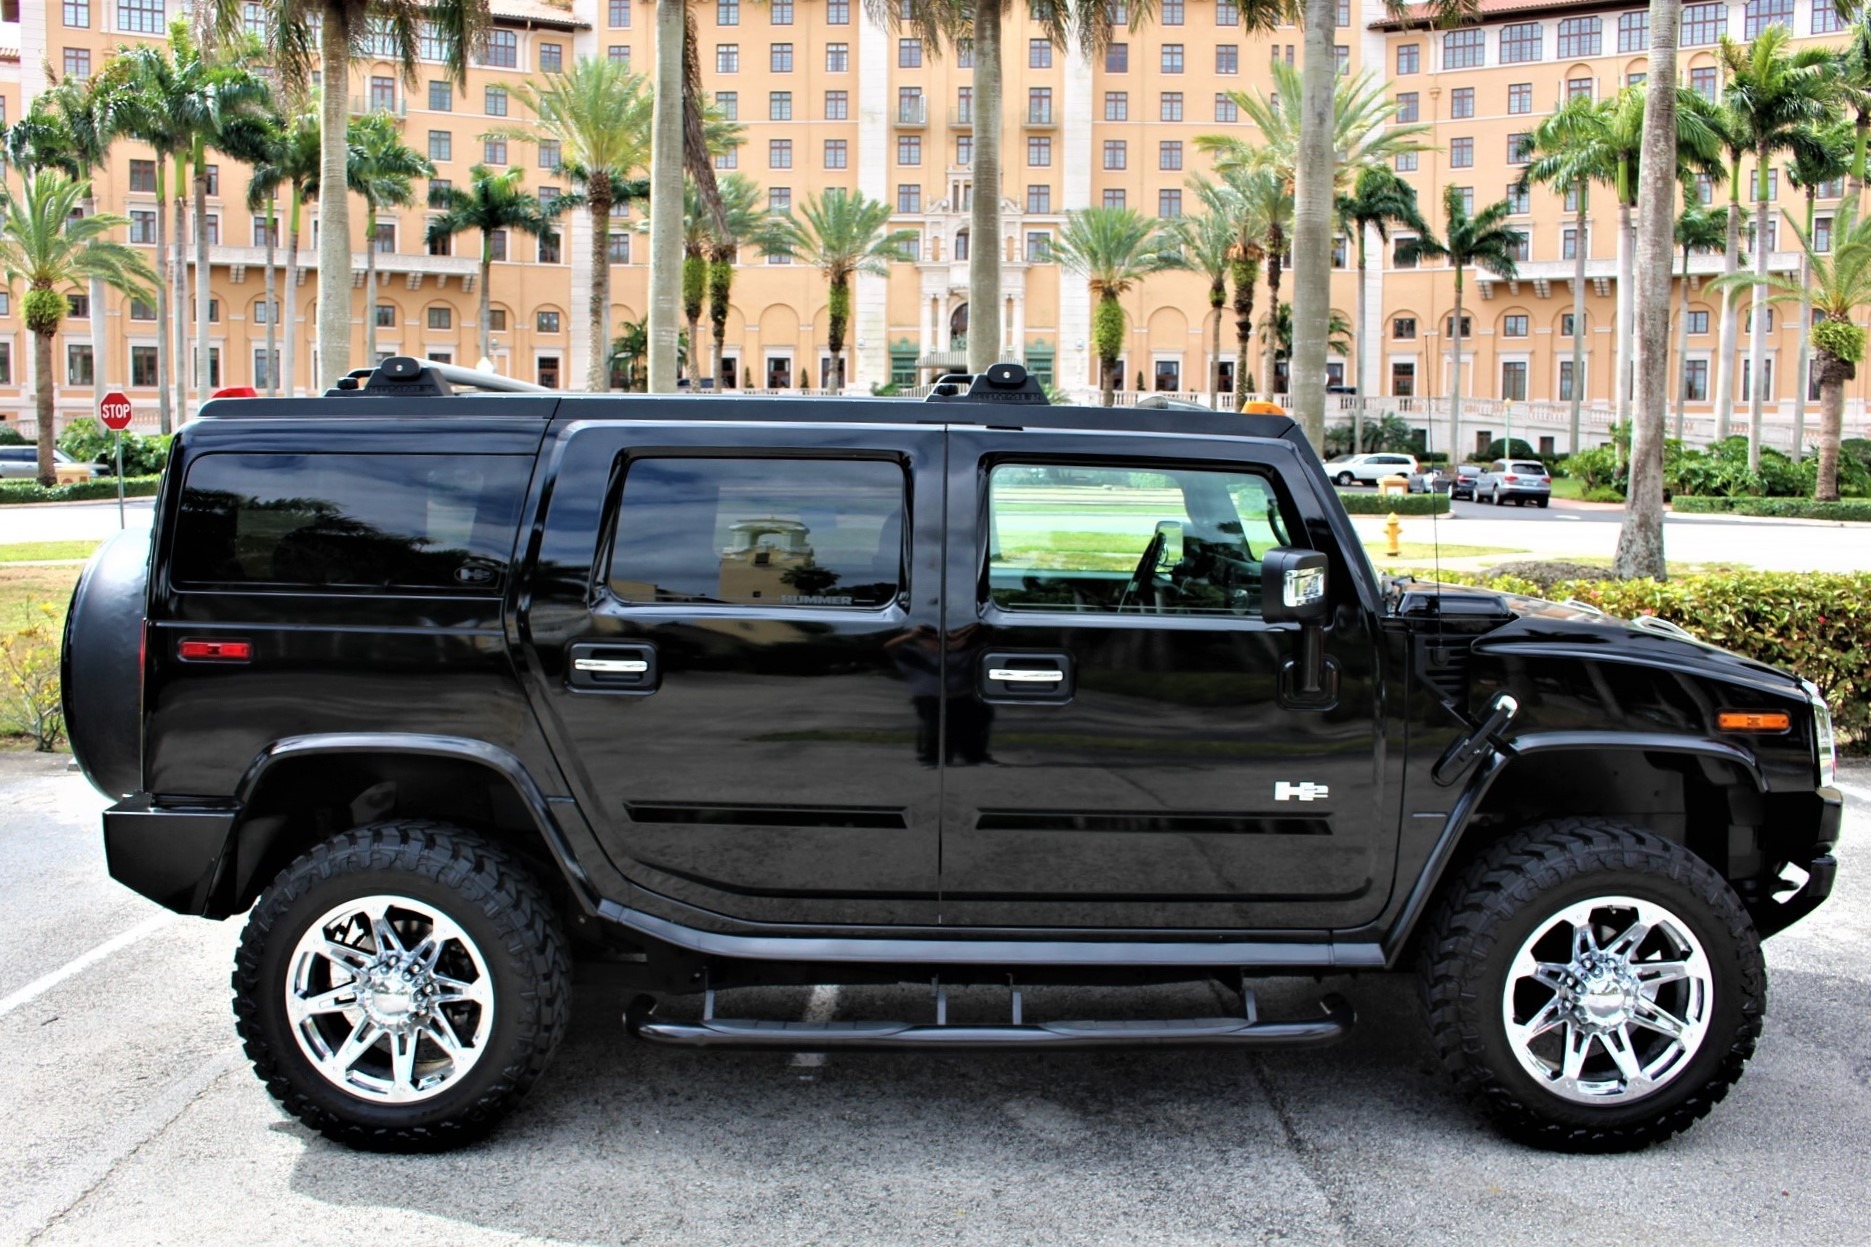 Used 2007 HUMMER H2 for sale Sold at The Gables Sports Cars in Miami FL 33146 2